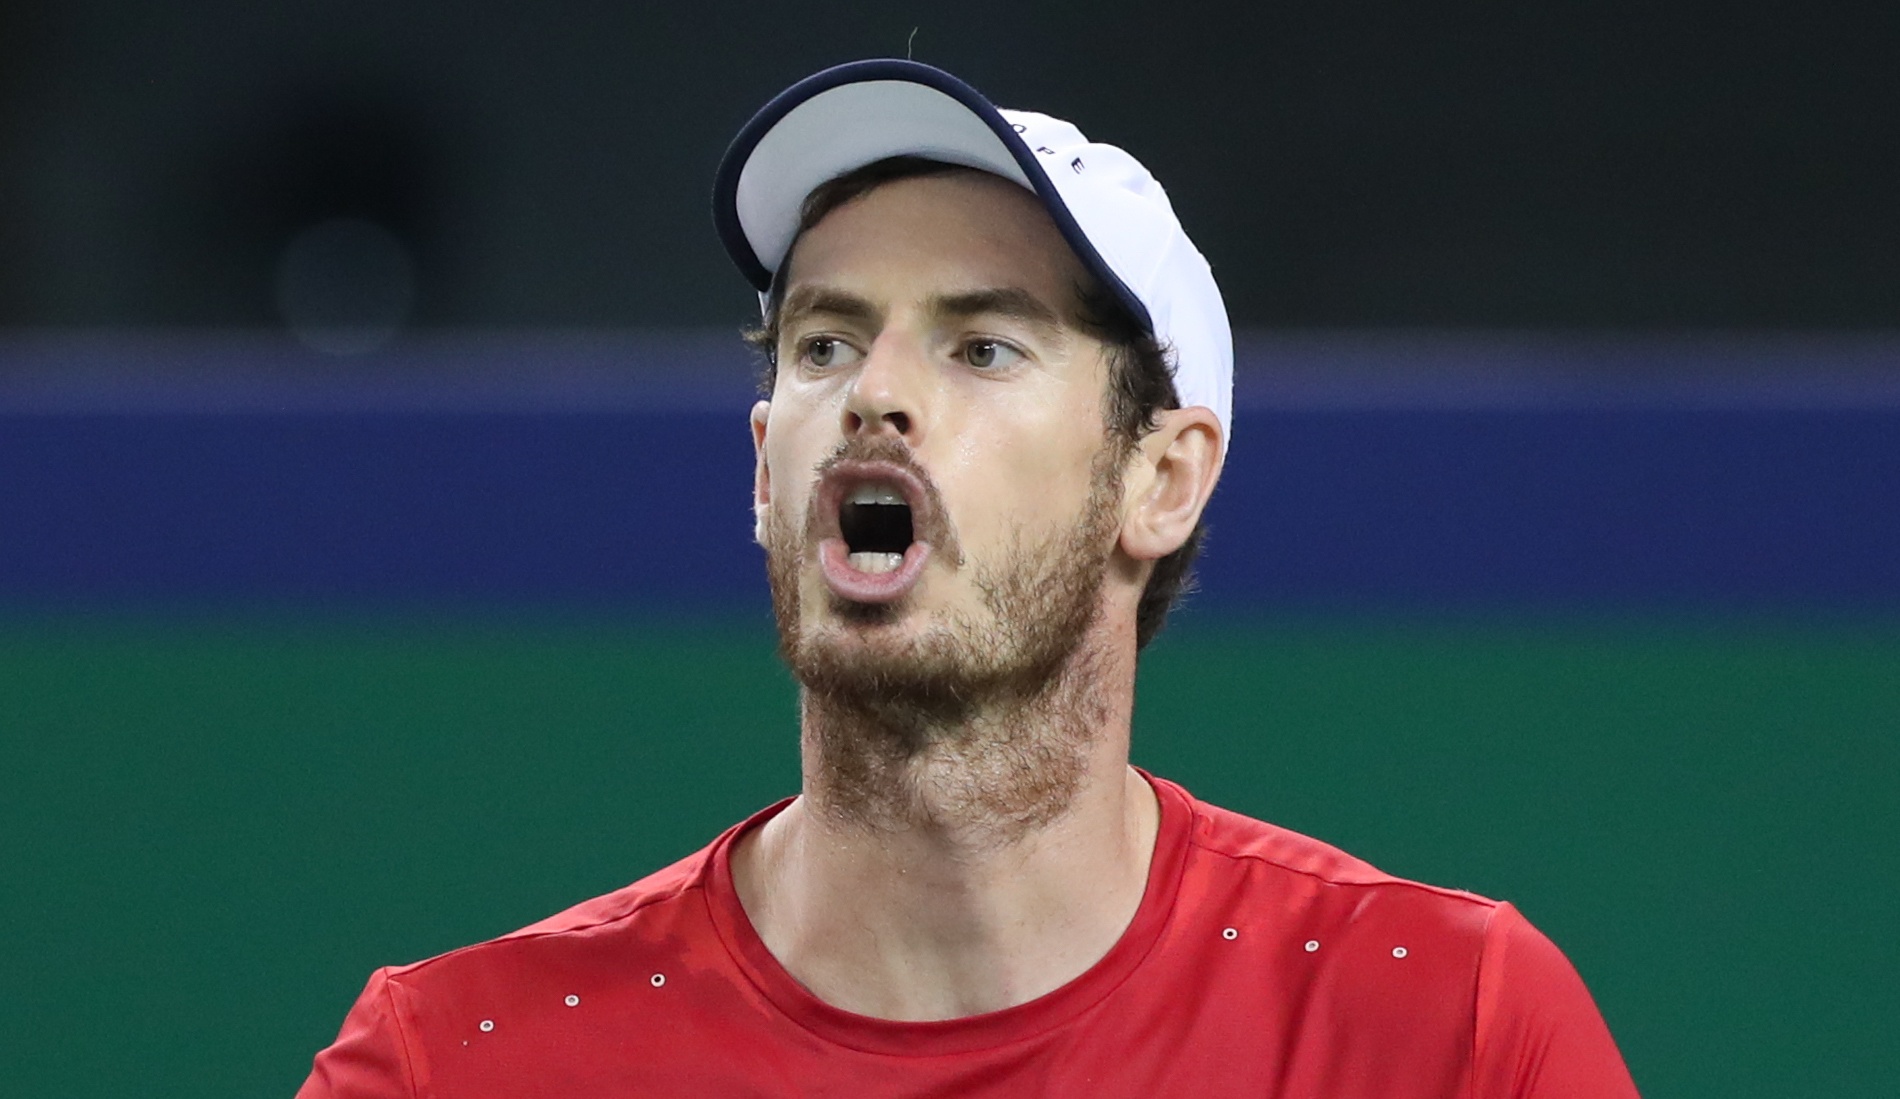 Andy Murray in 2019